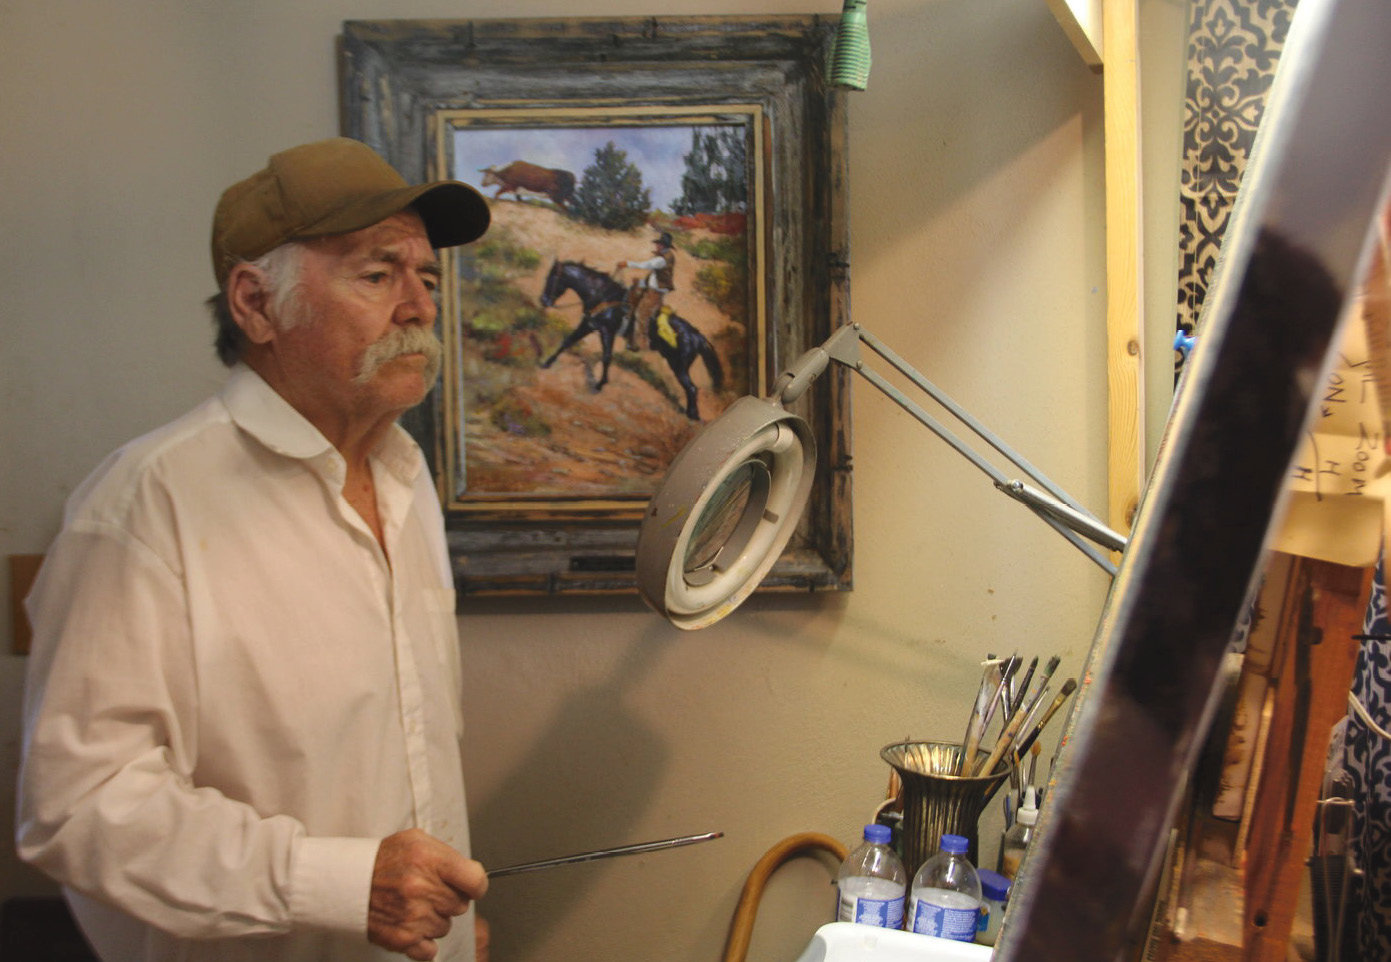 Mary Lee received third place for Best Portrait Photo in the state newspaper contest for this shot of Galen Wallum at his easel after recovering from a mosquito bite. Judges commented "this view captures a personality and is almost Rockwell-esque."